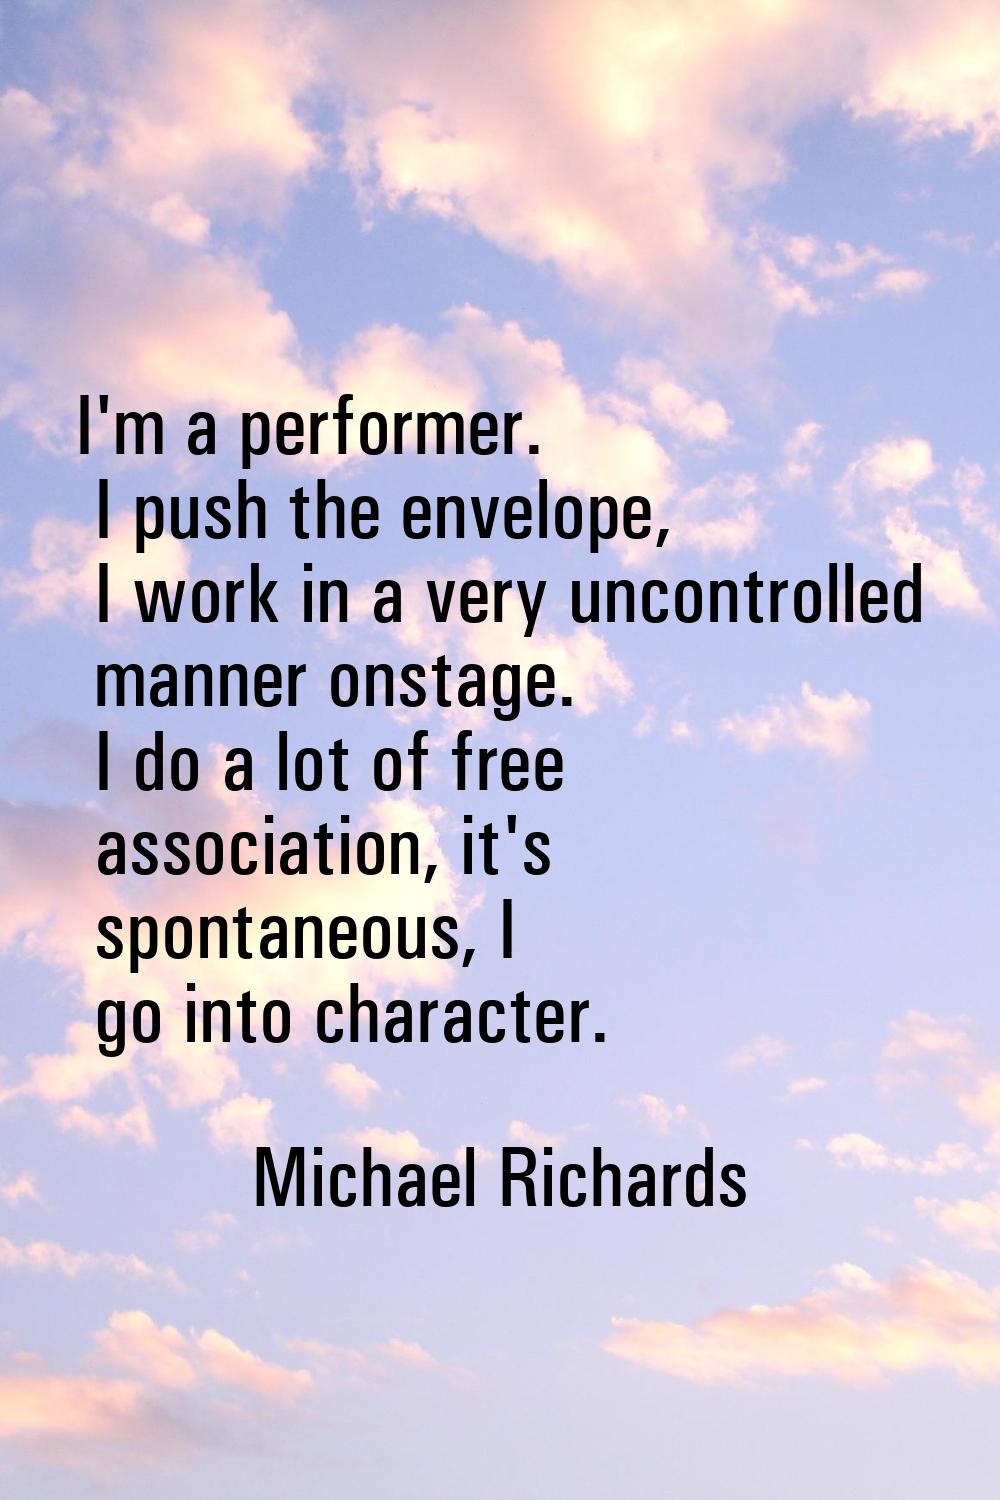 I'm a performer. I push the envelope, I work in a very uncontrolled manner onstage. I do a lot of f